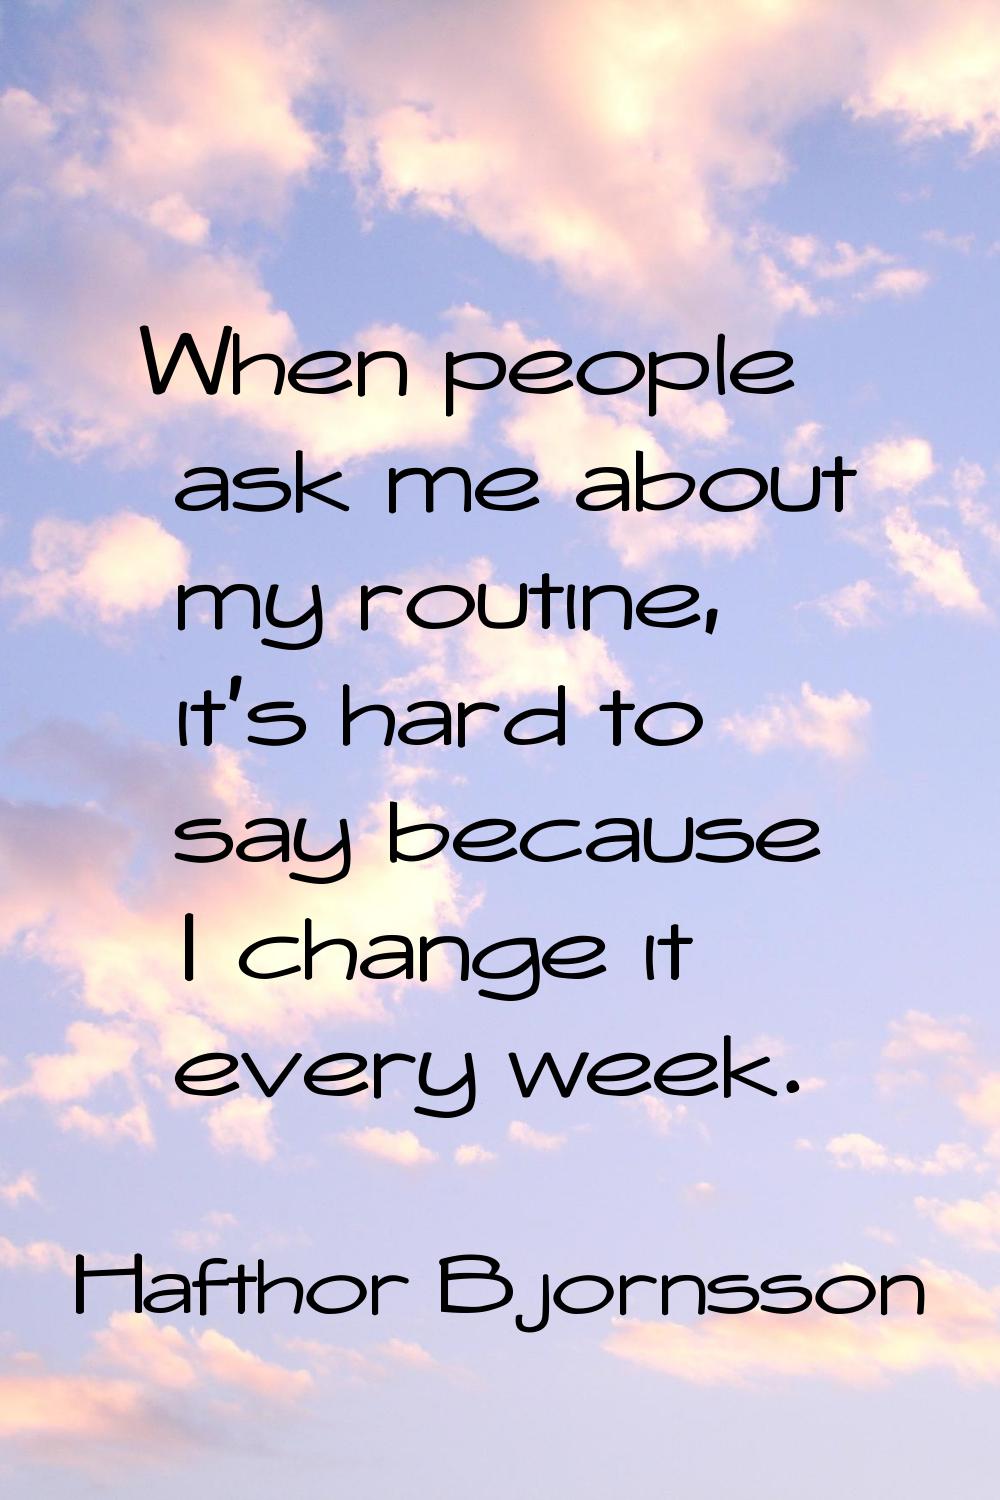 When people ask me about my routine, it's hard to say because I change it every week.